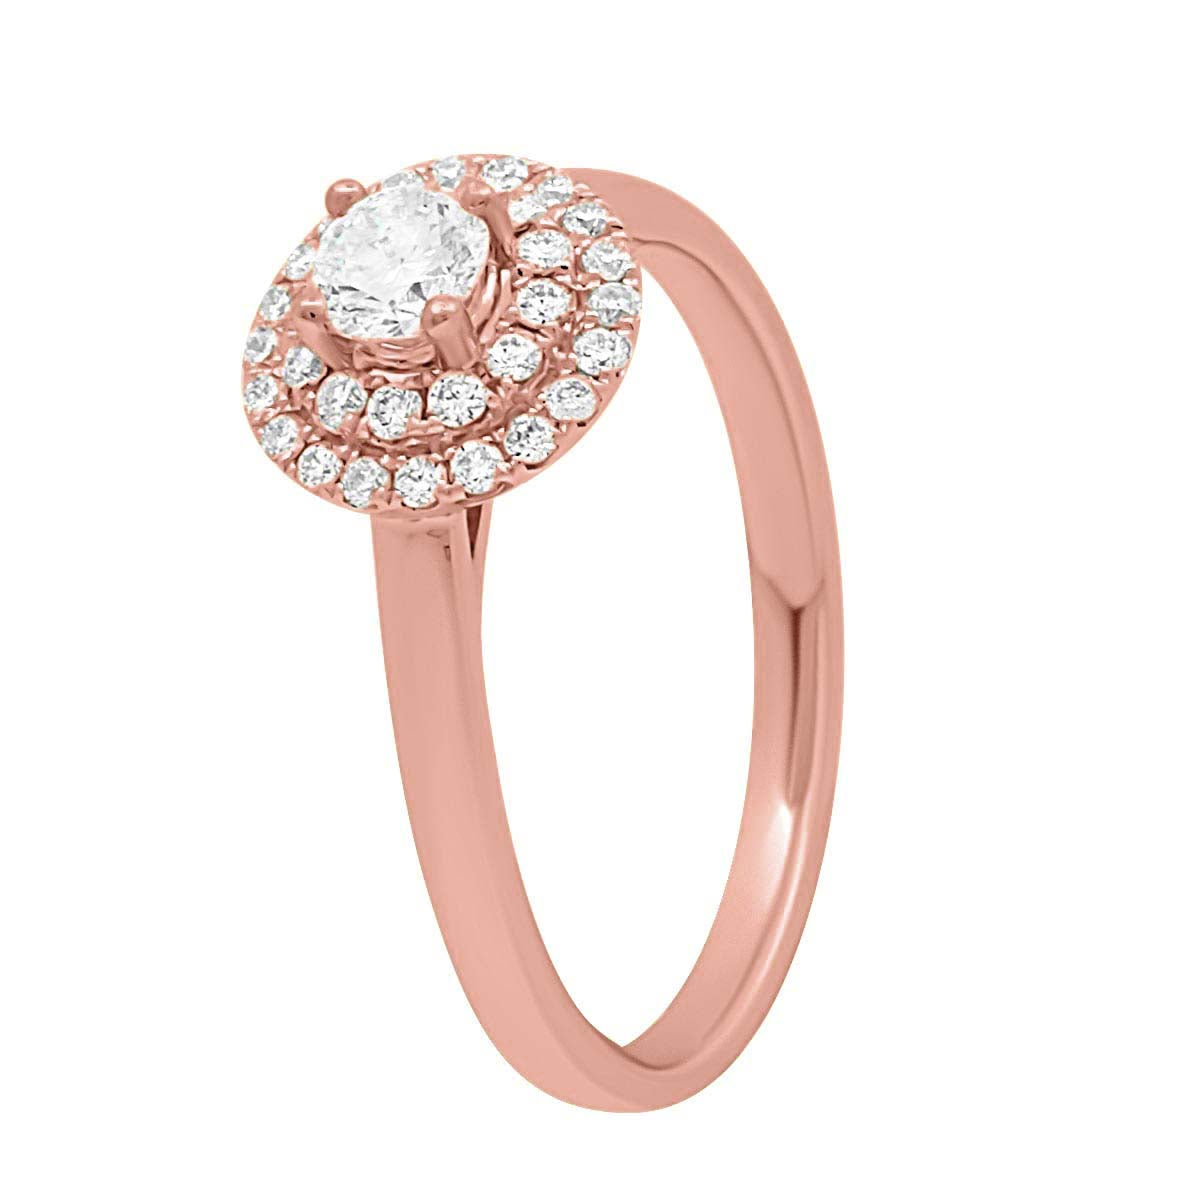 Ornate Diamond Ring WITH DOUBLE HALO SET IN ROSE GOLD UPRIGHT FROM AN ANGLE